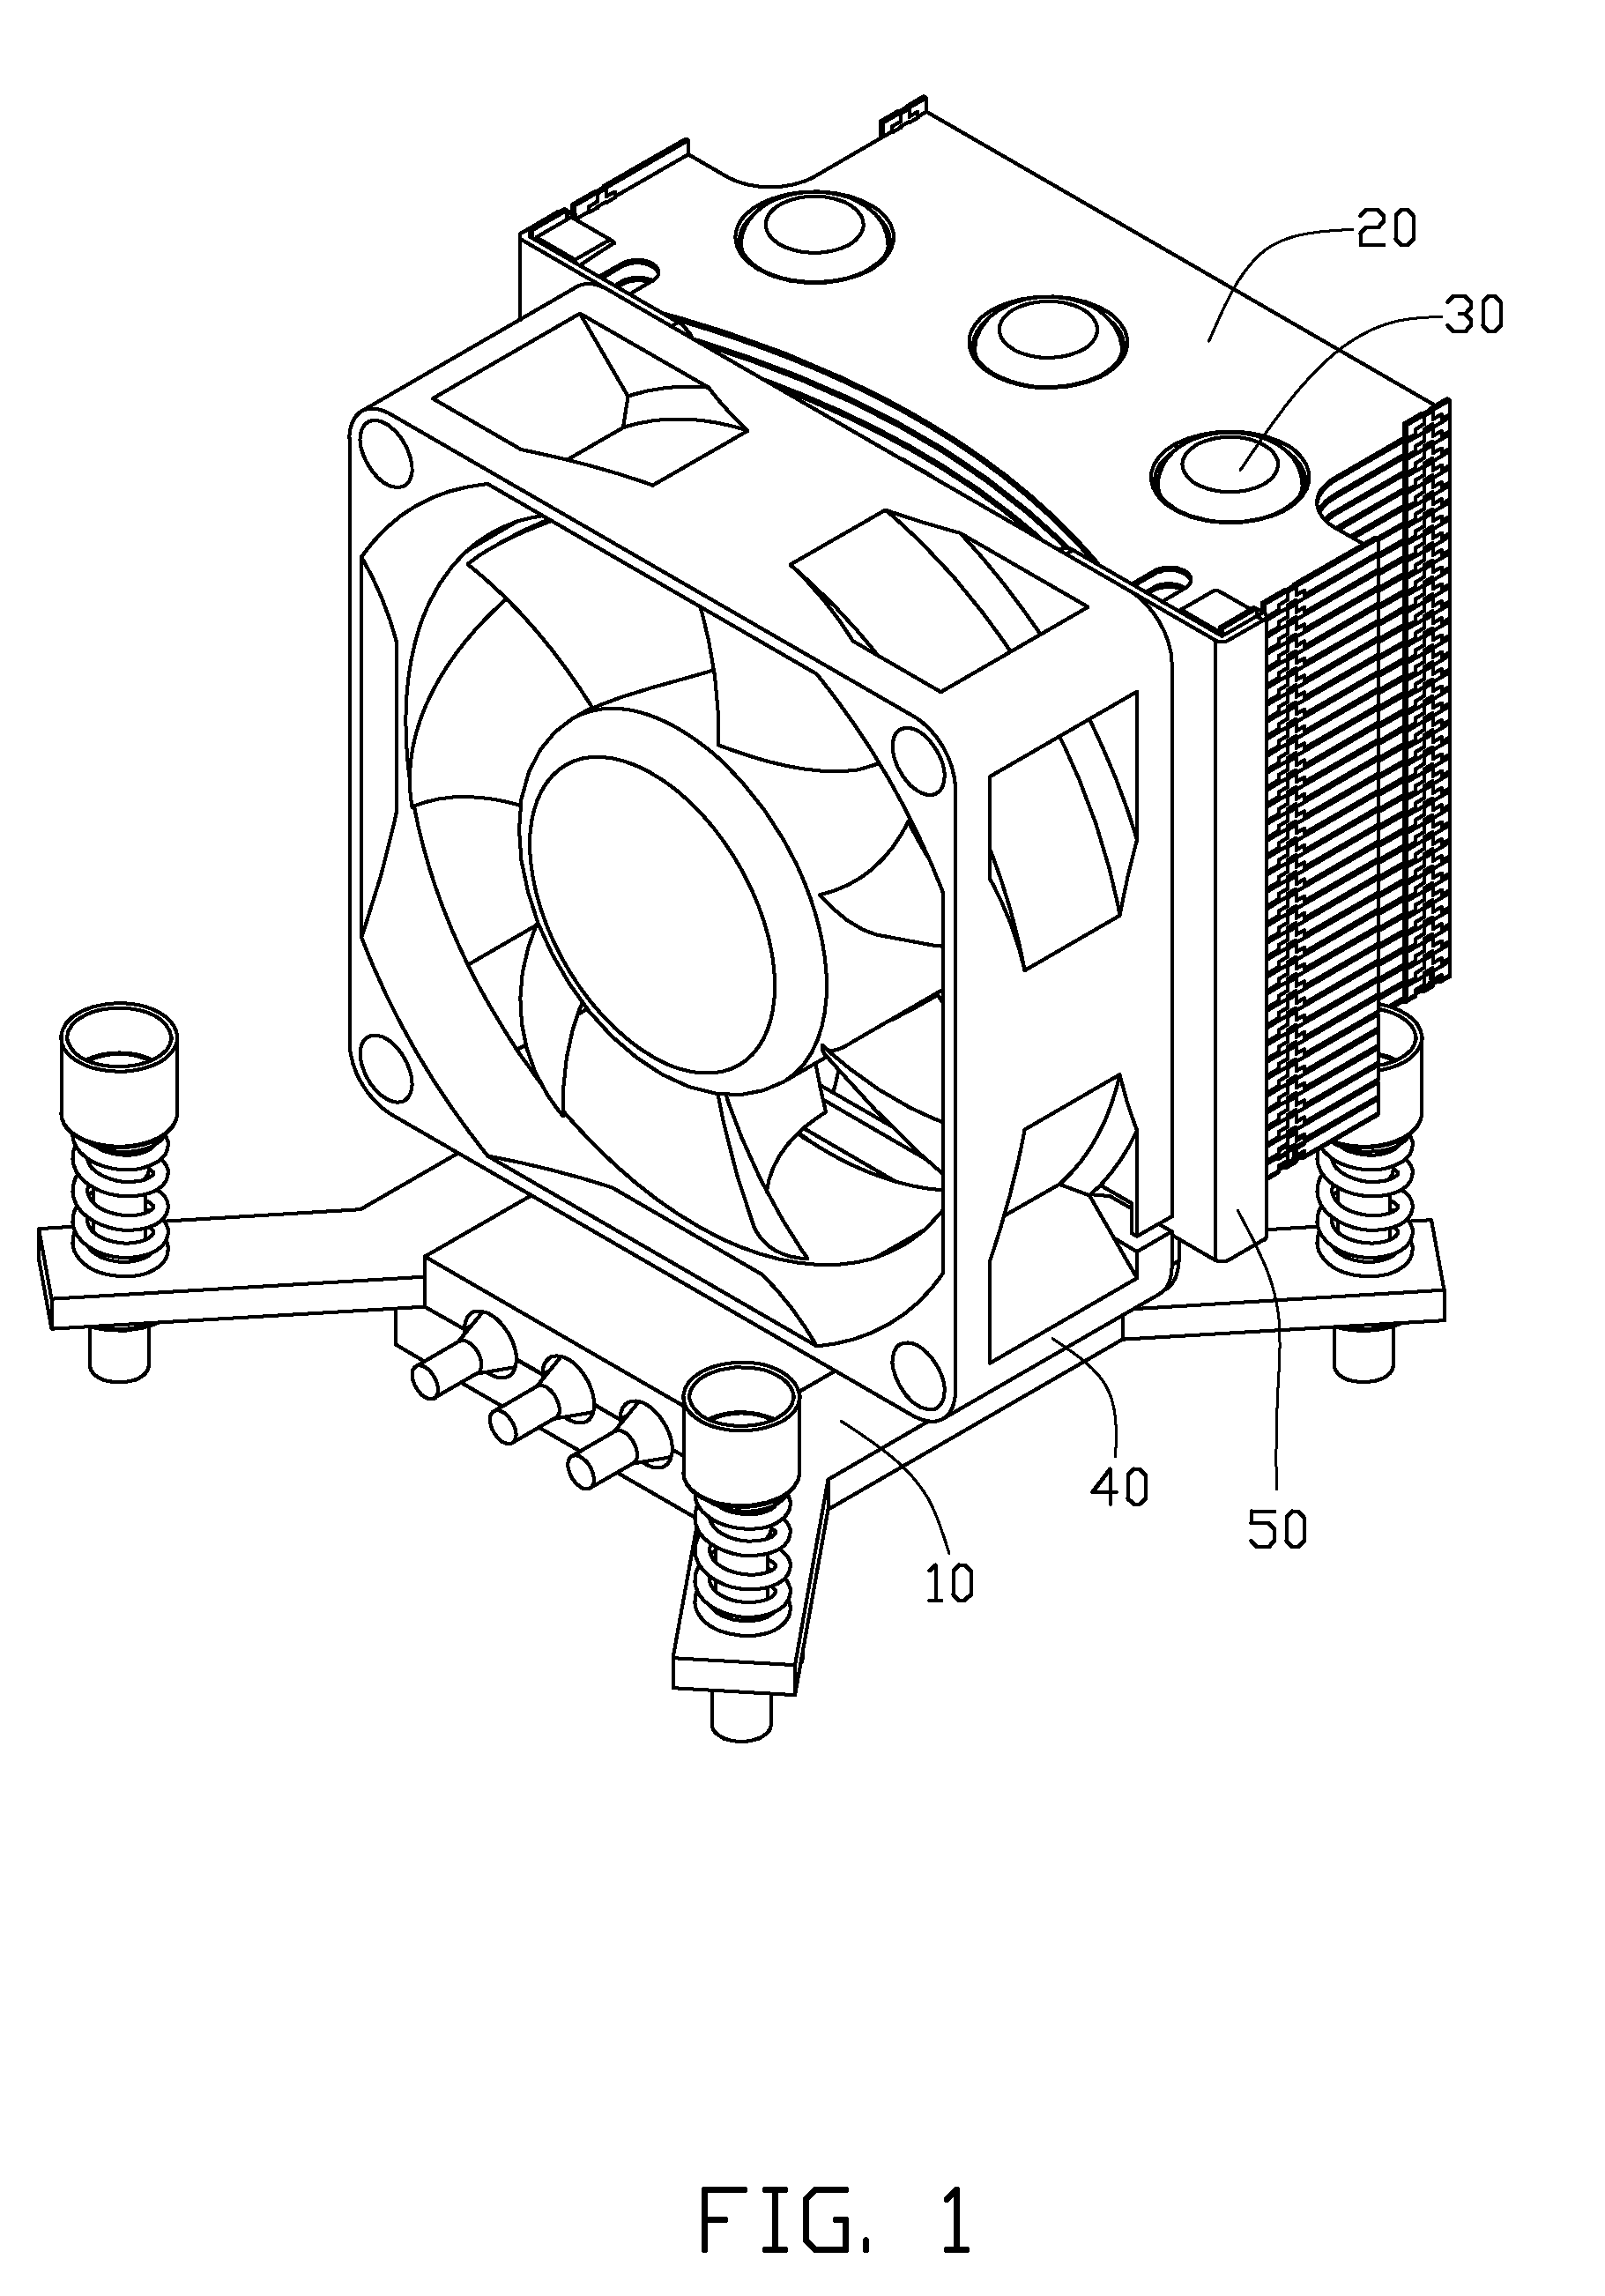 Heat dissipation device with heat pipe